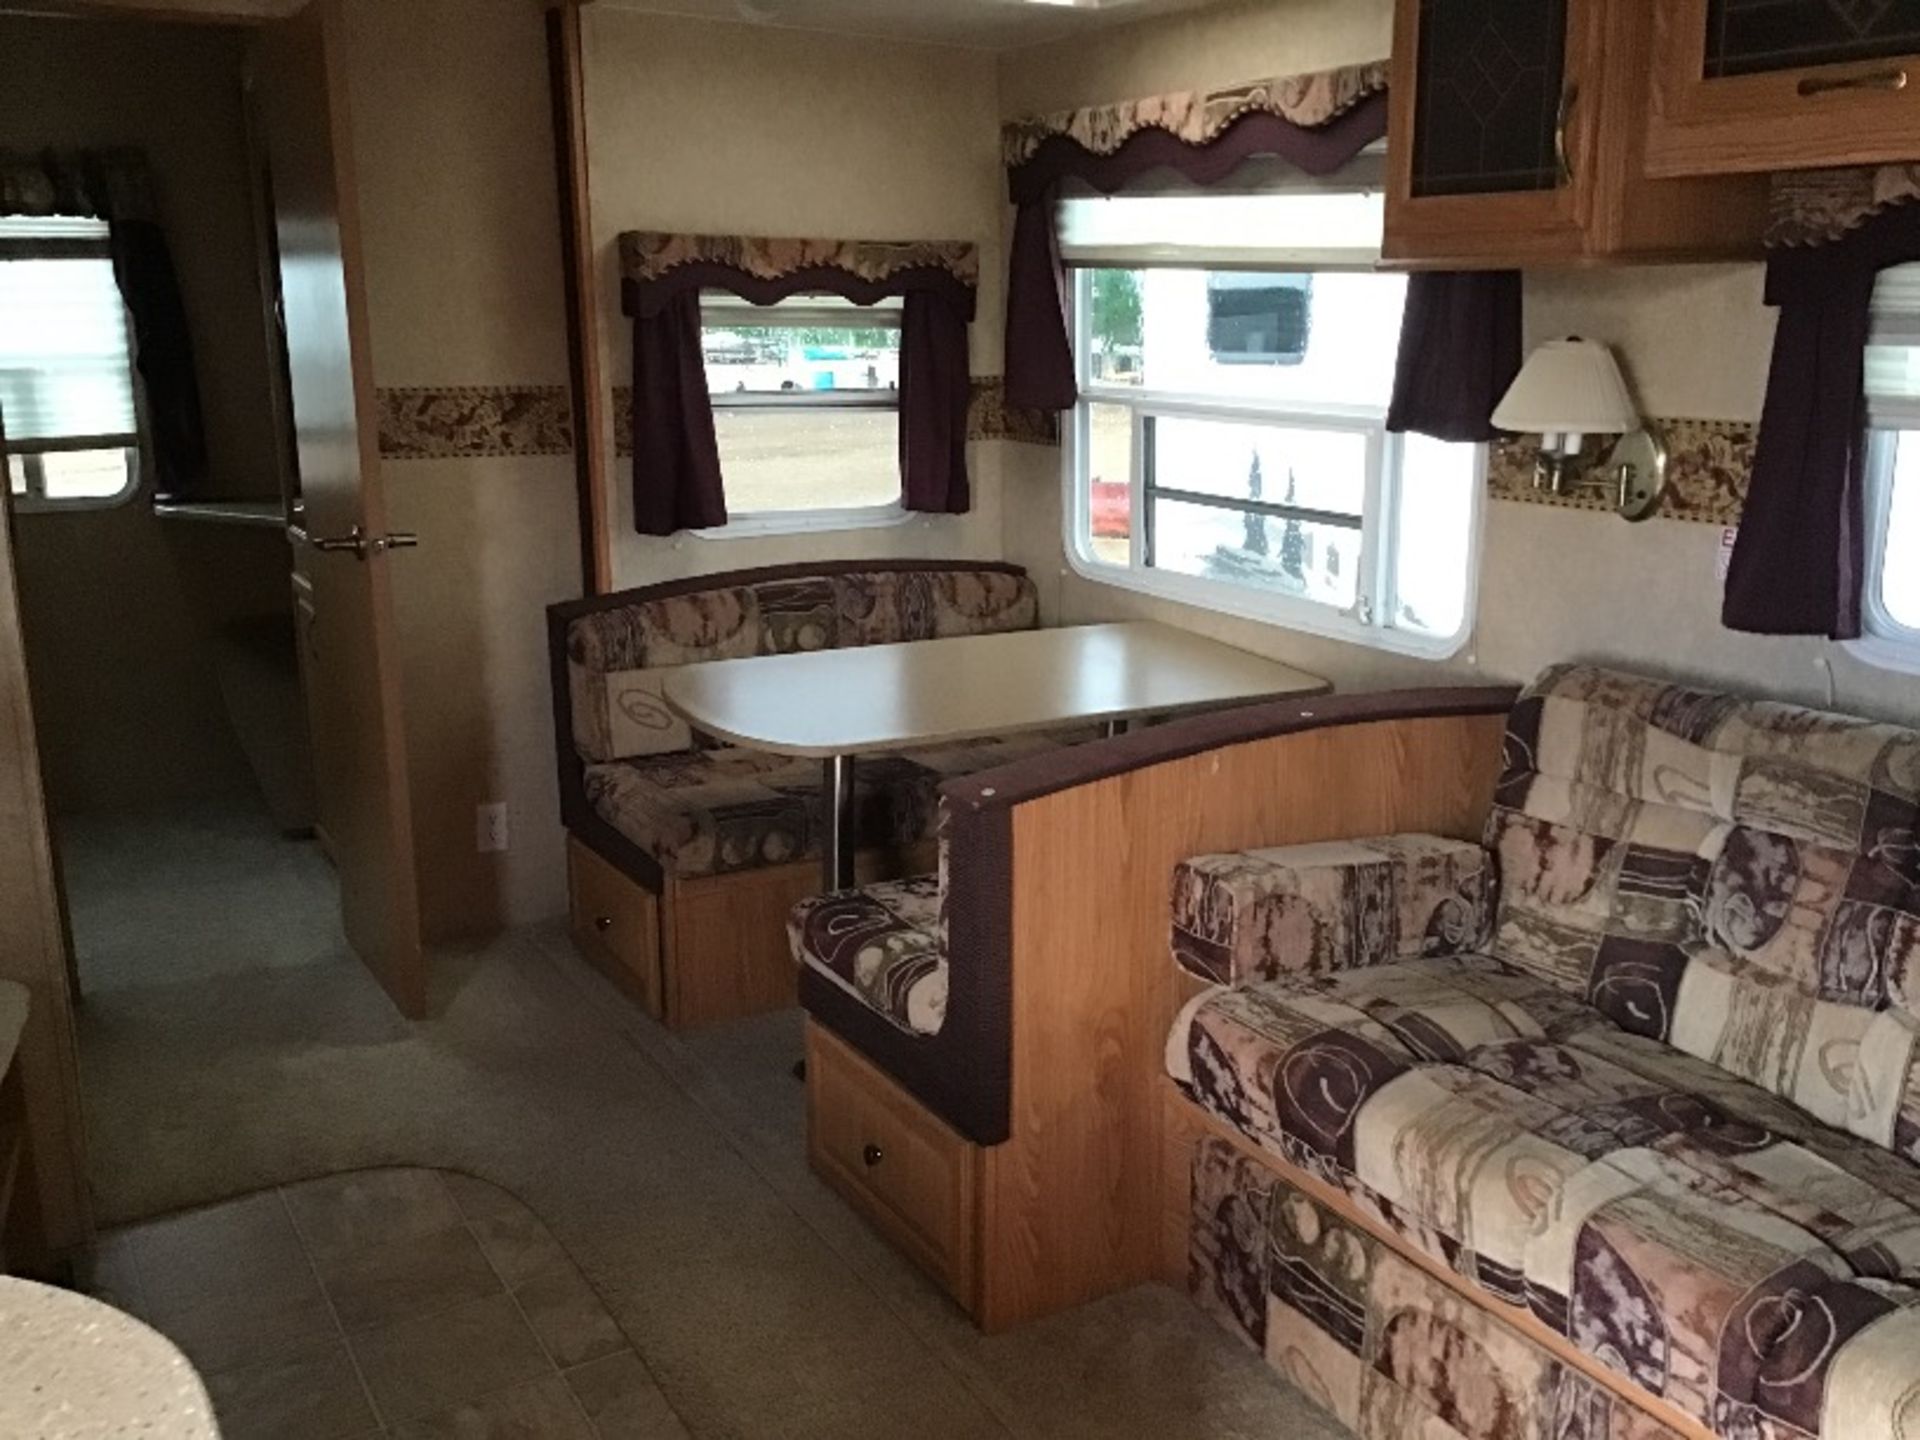 2007 Sandpiper F315 by Forest River 5th Wheel Holiday Trailer - Image 13 of 29